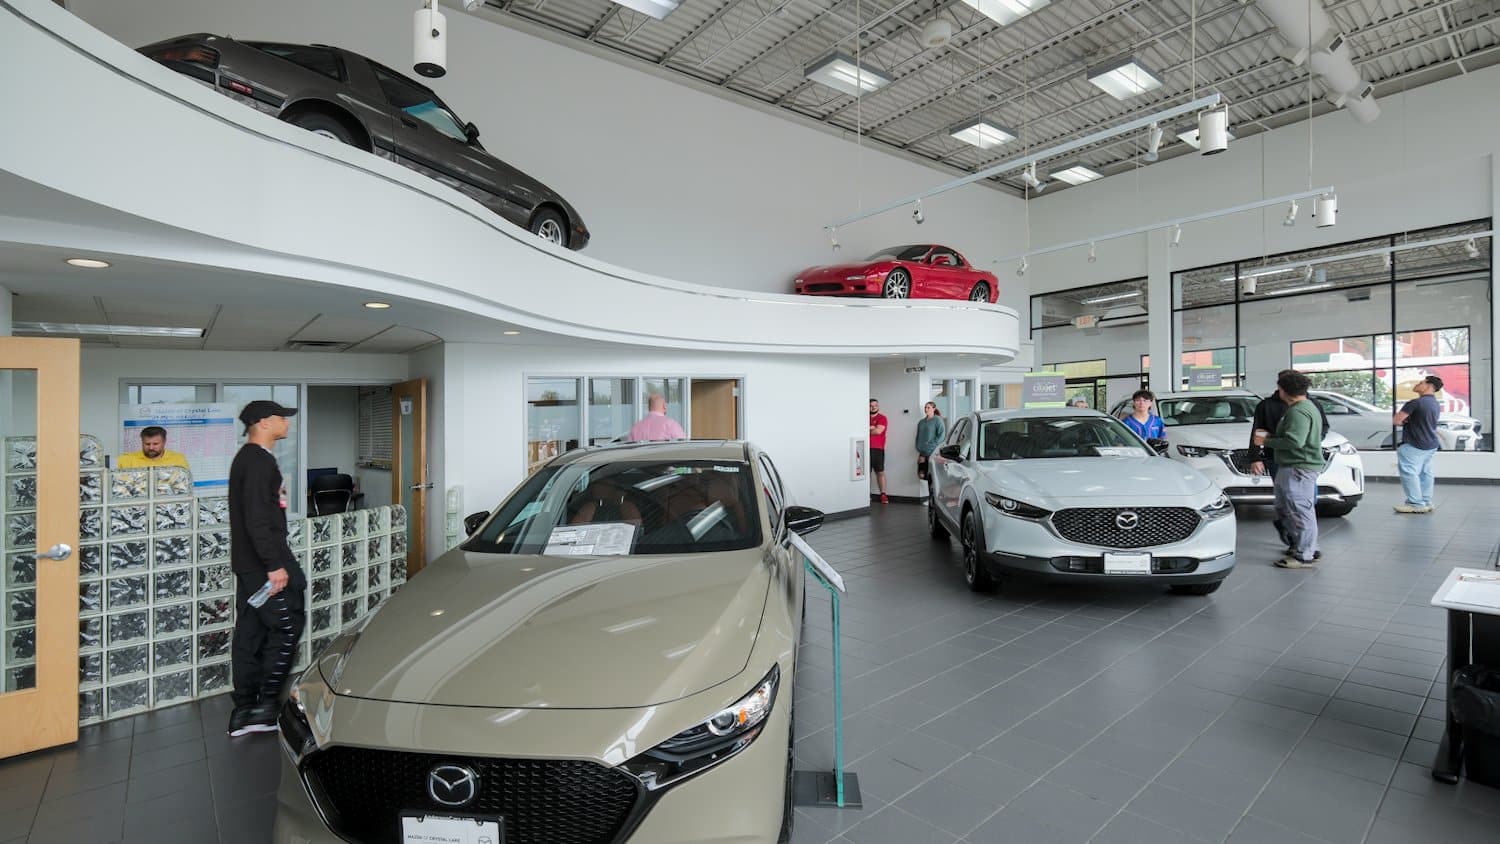 Inside the Mazda showroom at Anderson.